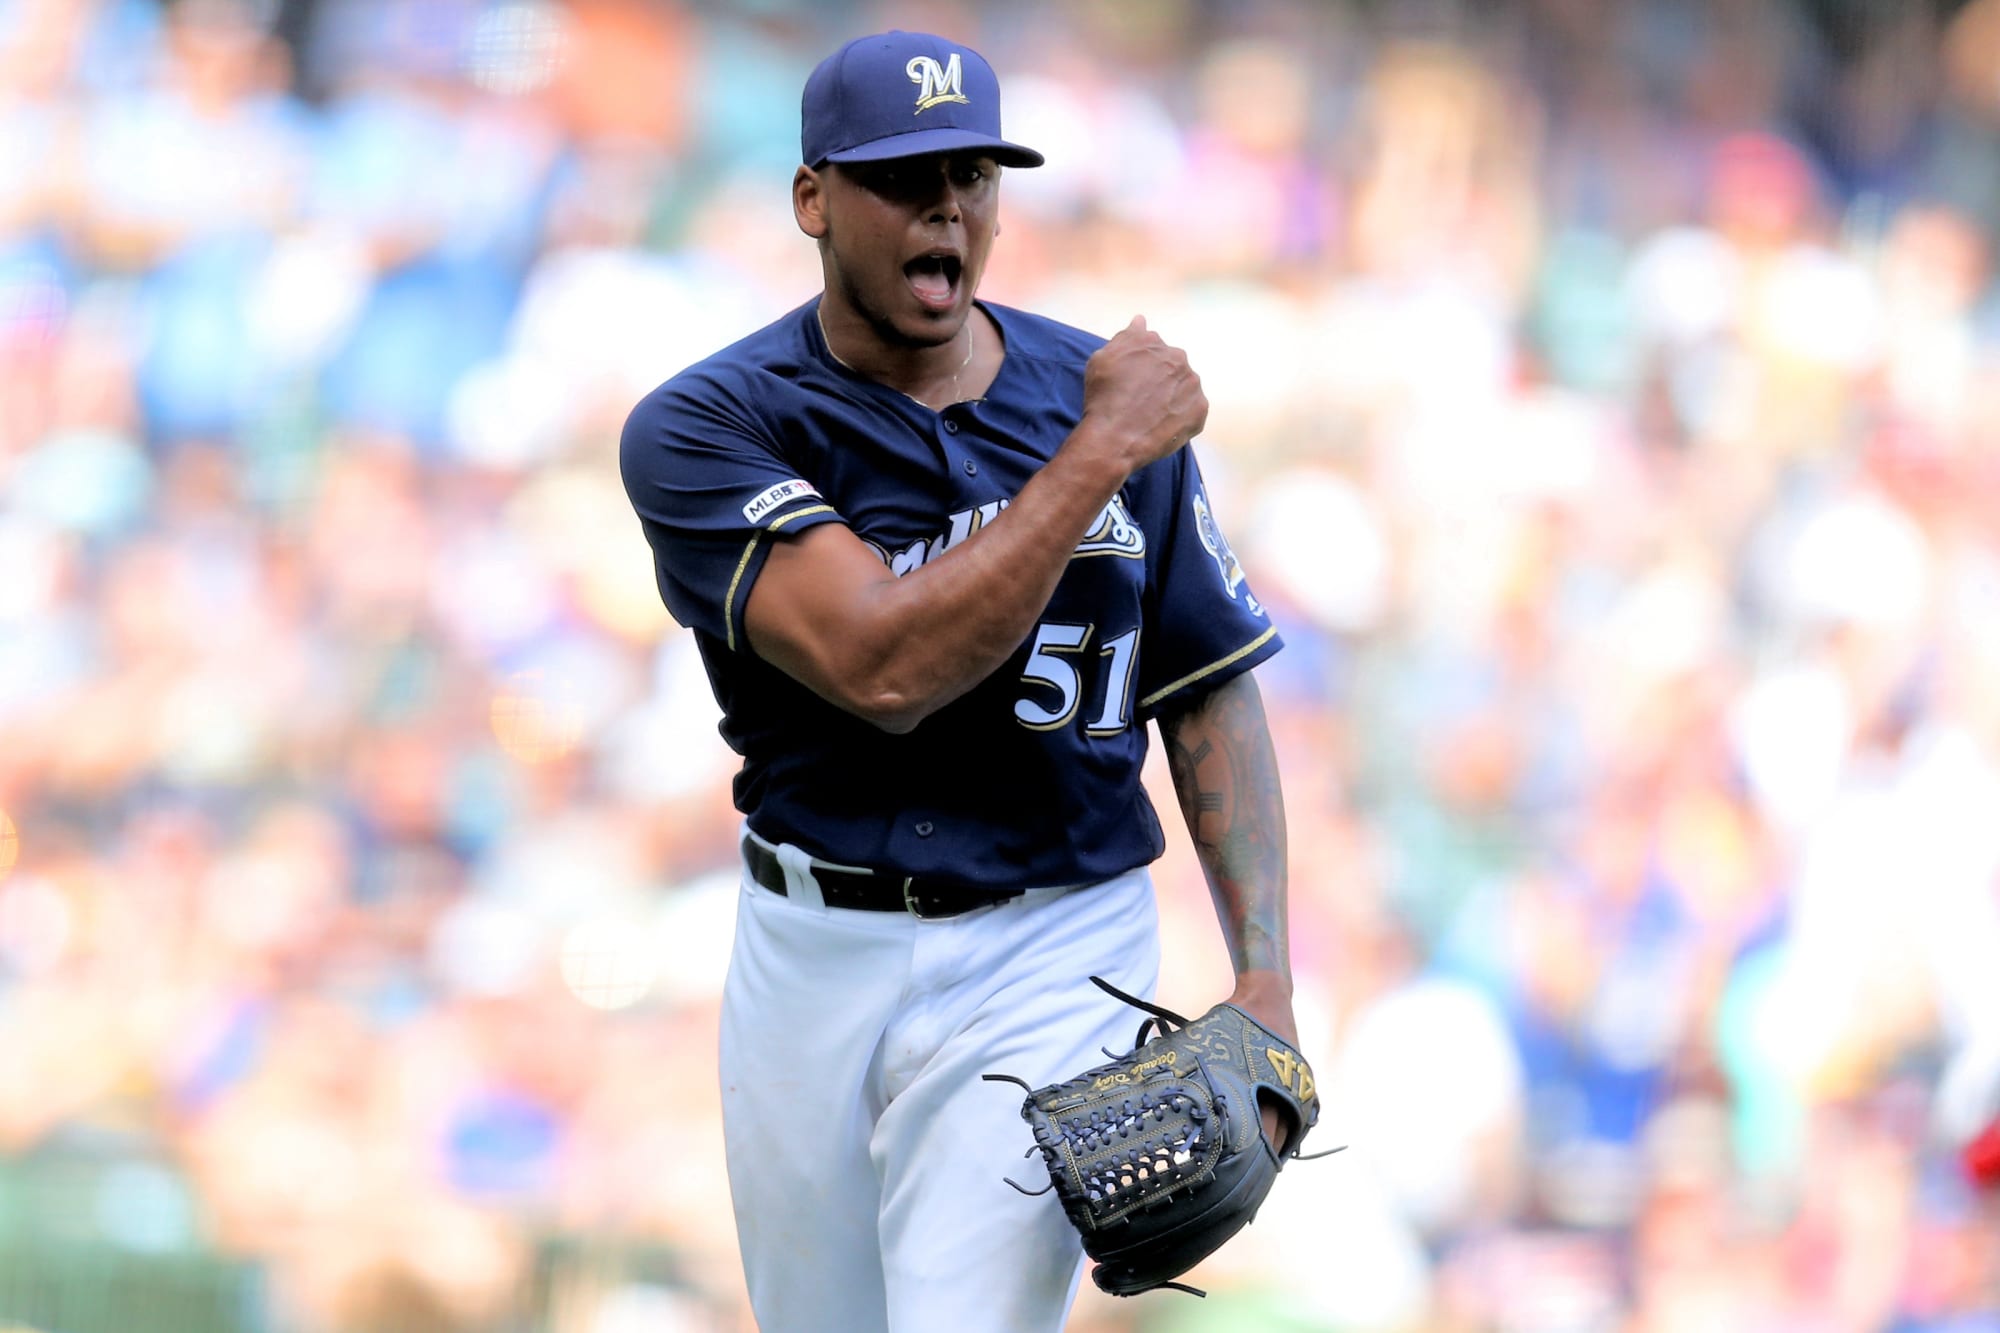 Milwaukee Brewers: Freddy Peralta is Looking Great in Winter Ball